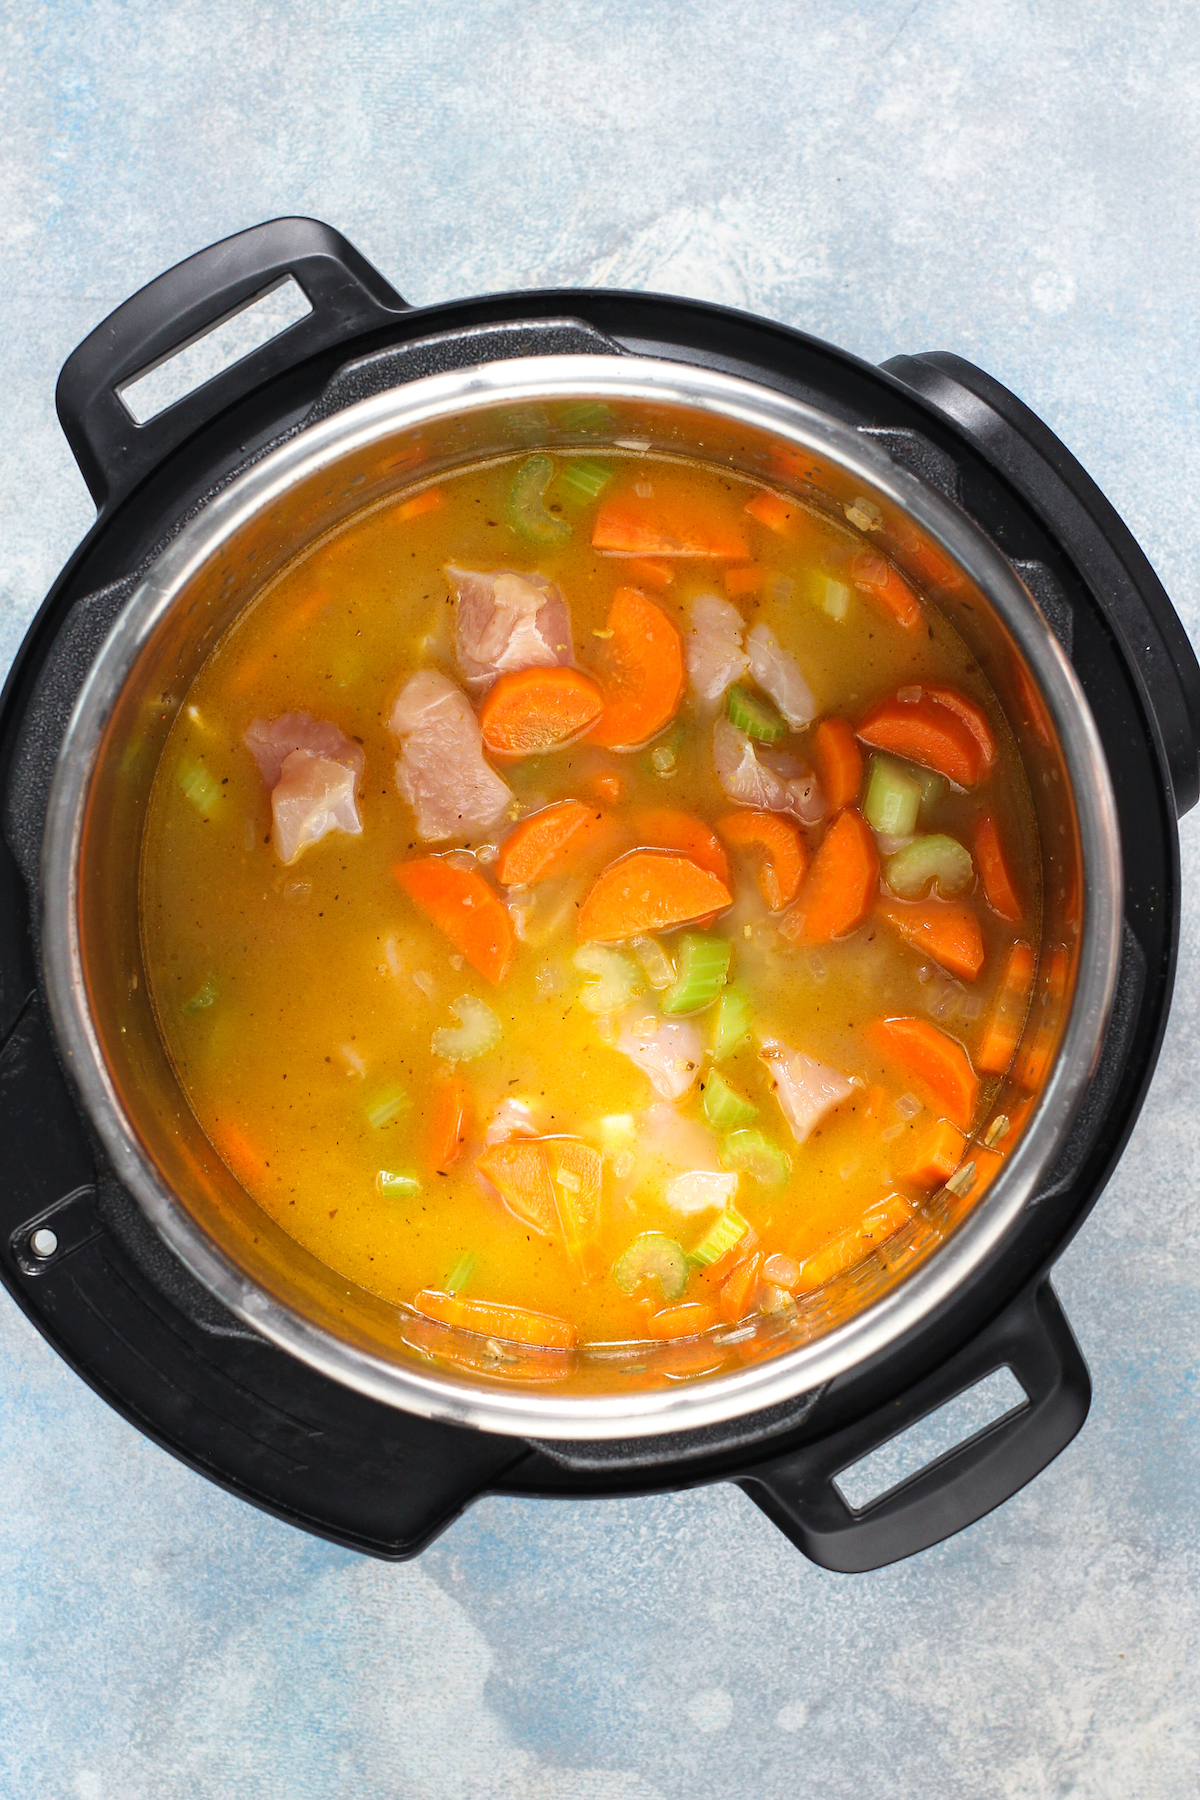 Chicken, broth, and veggies in an Instant Pot.